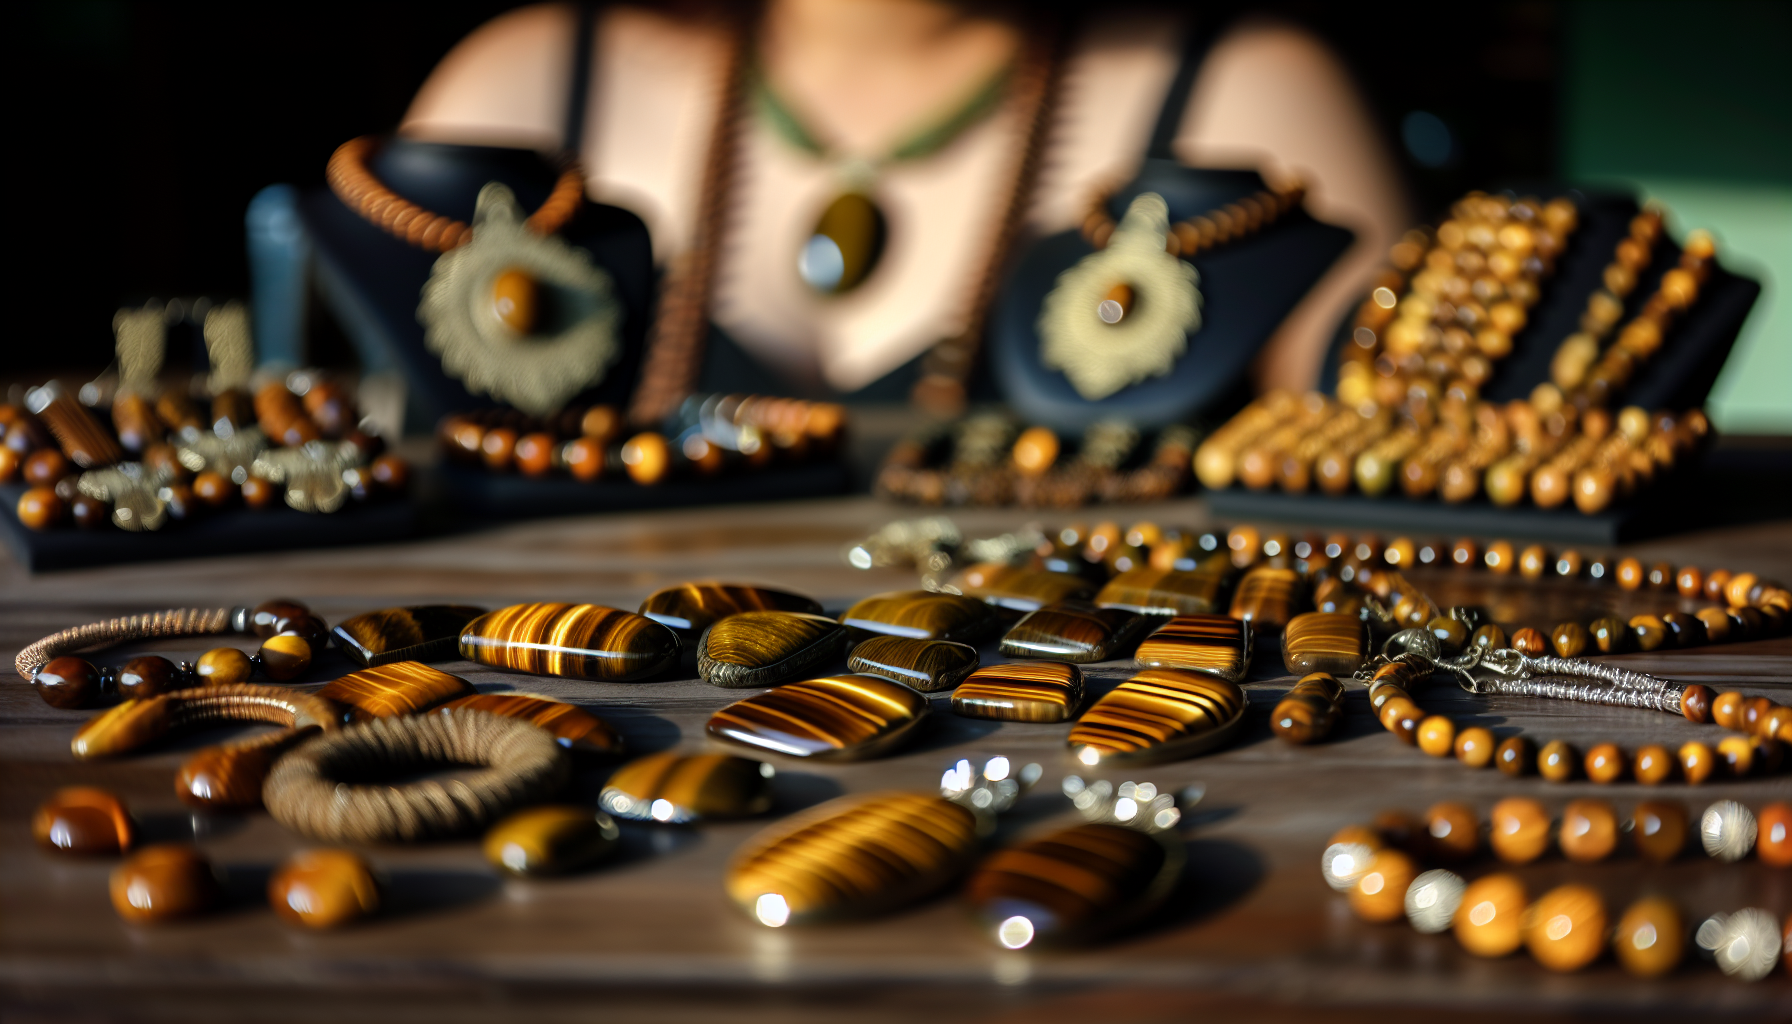 Tiger's Eye jewelry for self-confidence and protection